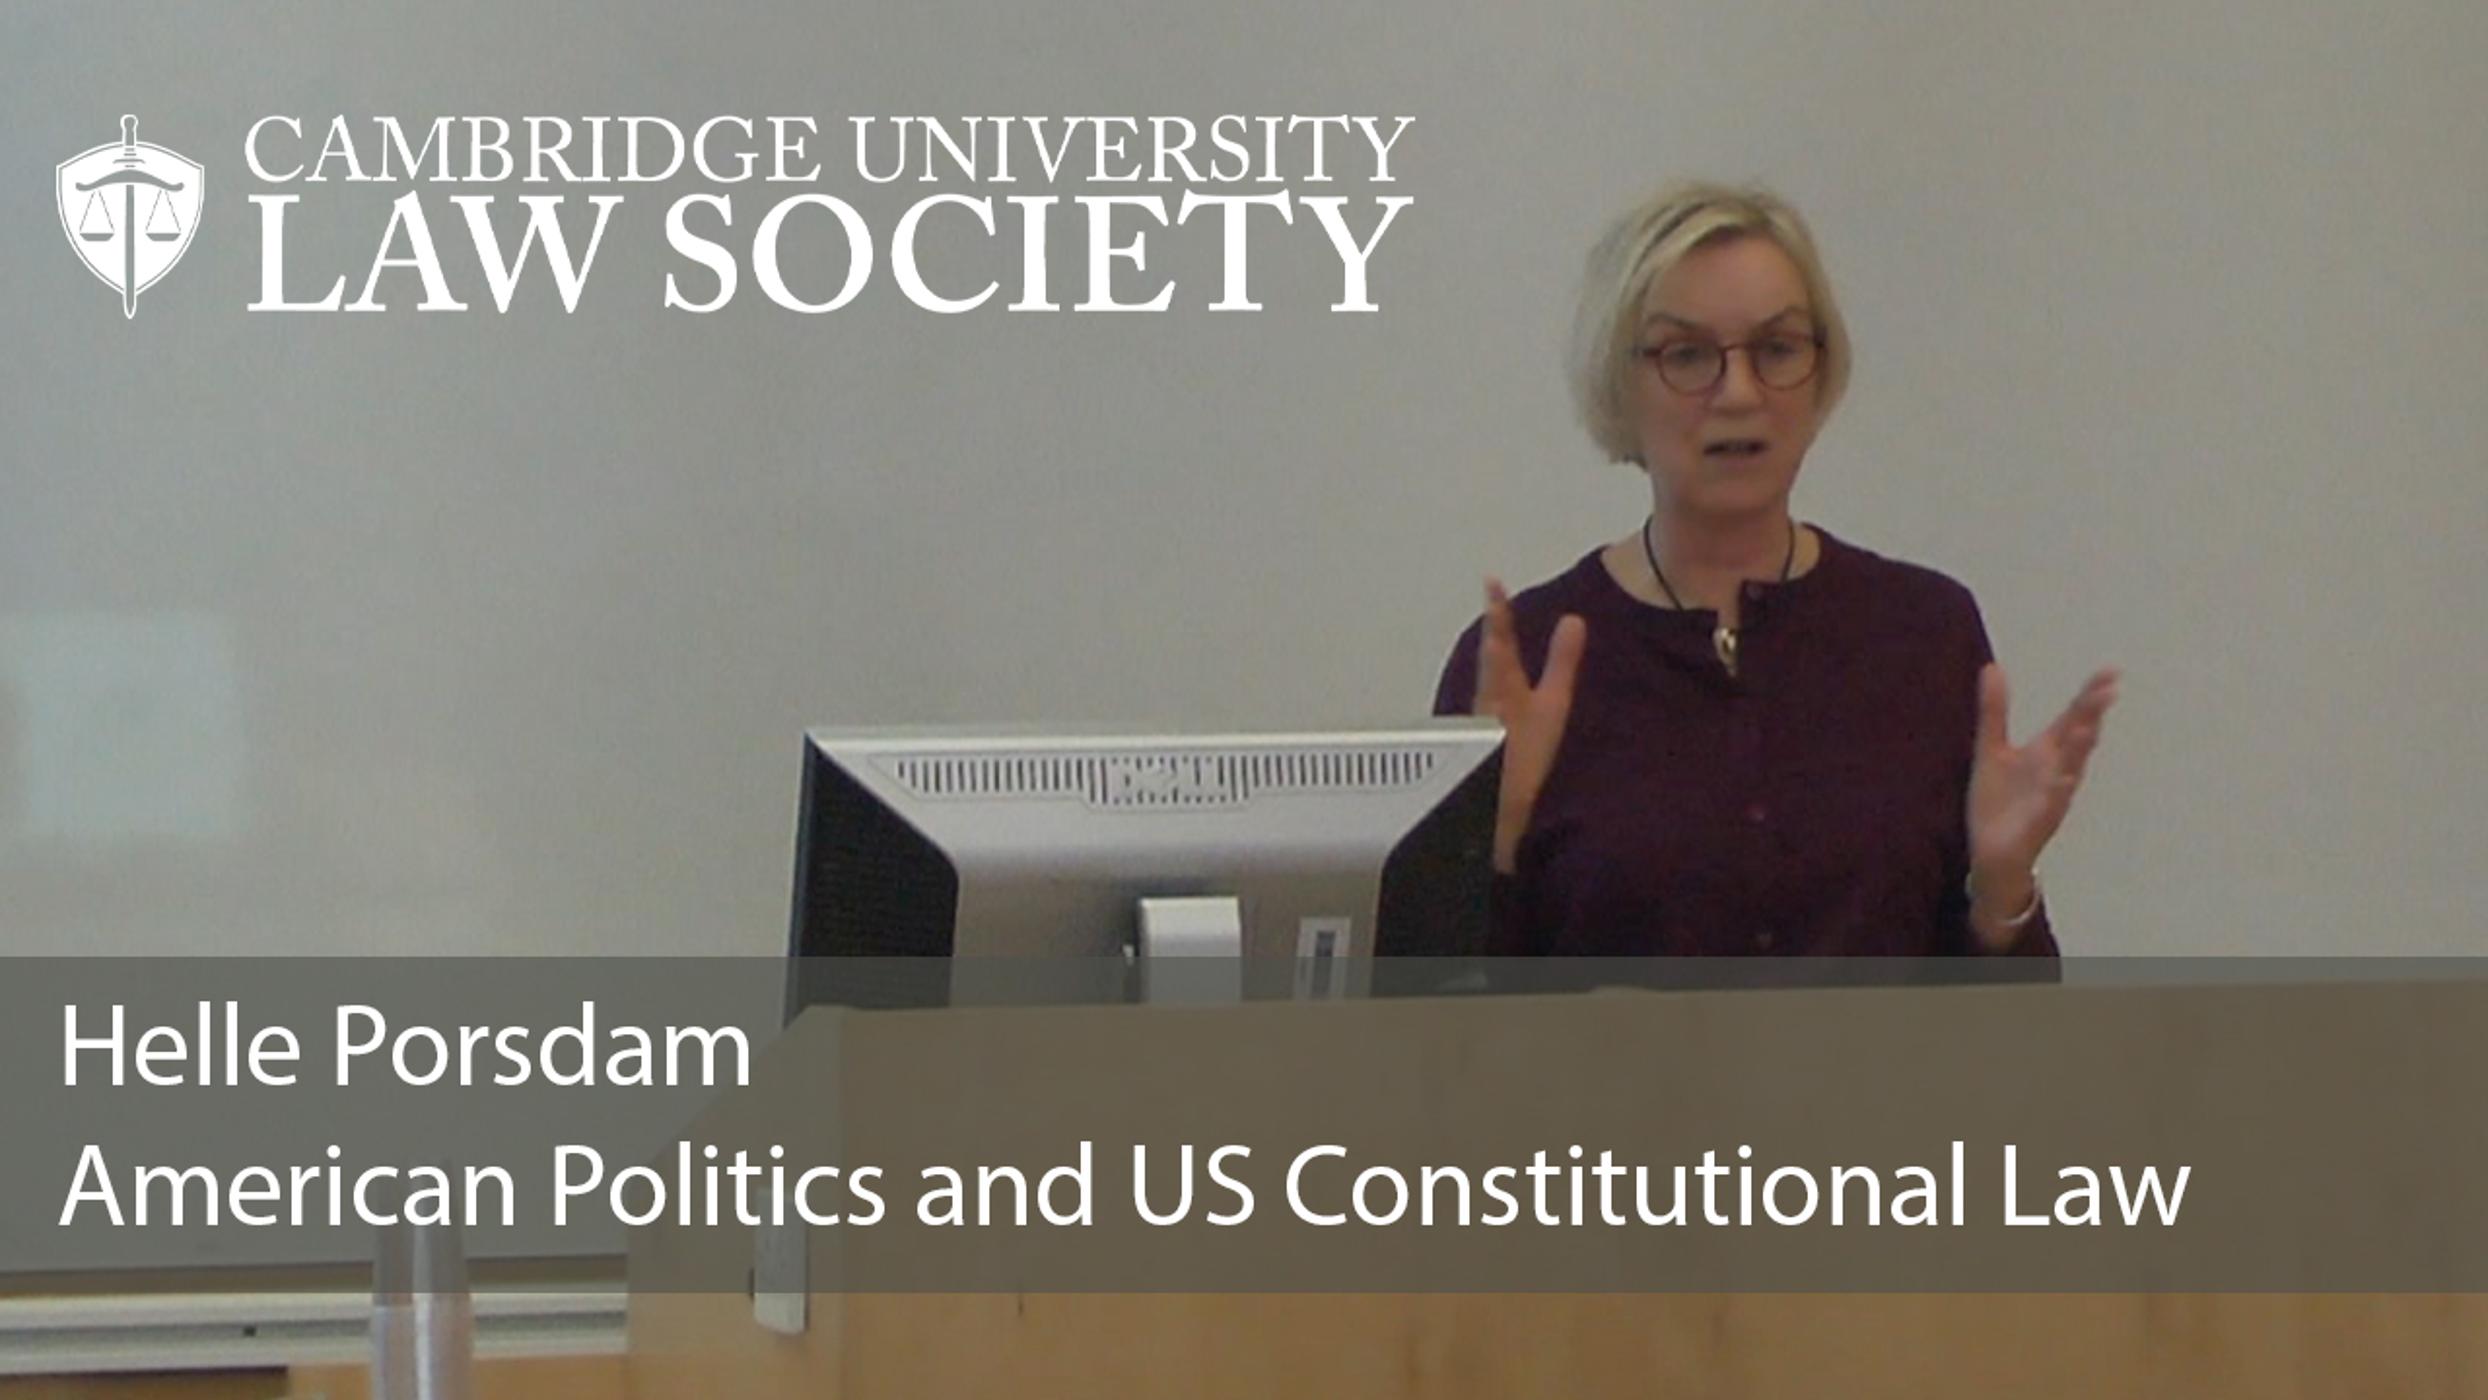 'American Politics and US Constitutional Law' - Helle Porsdam: CULS Lecture